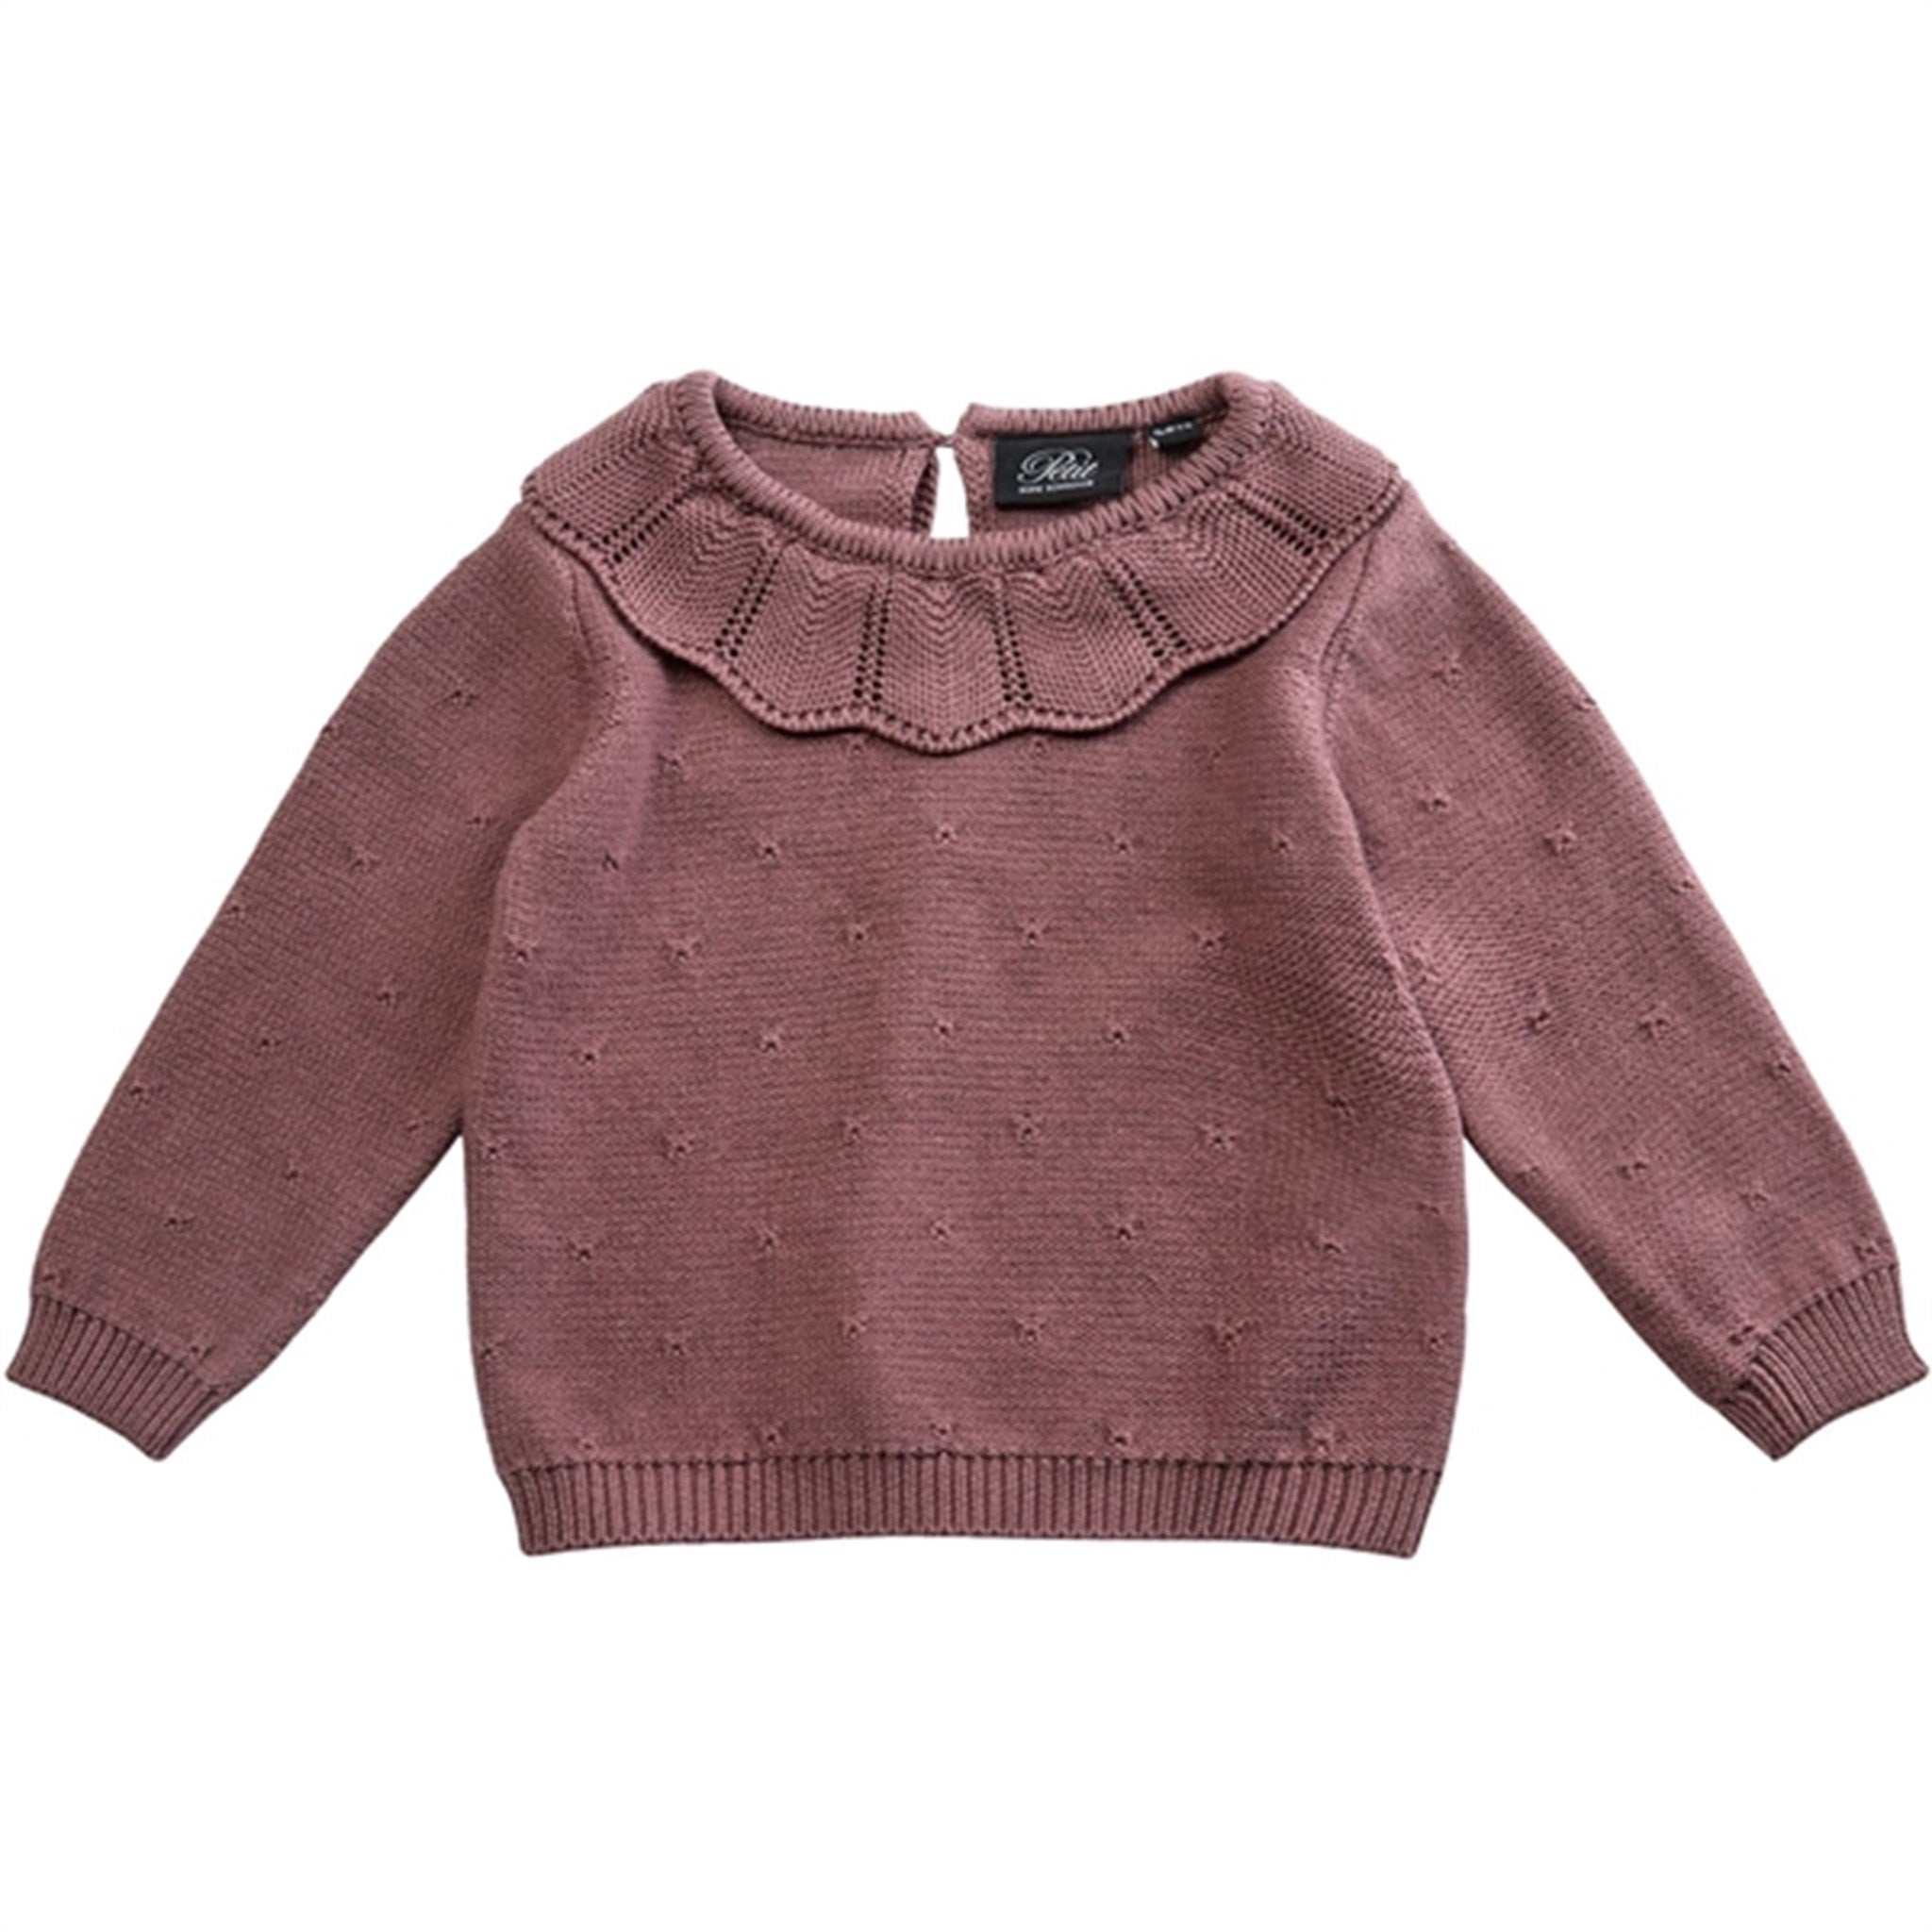 Petit By Sofie Schnoor Bright Lilac Knit